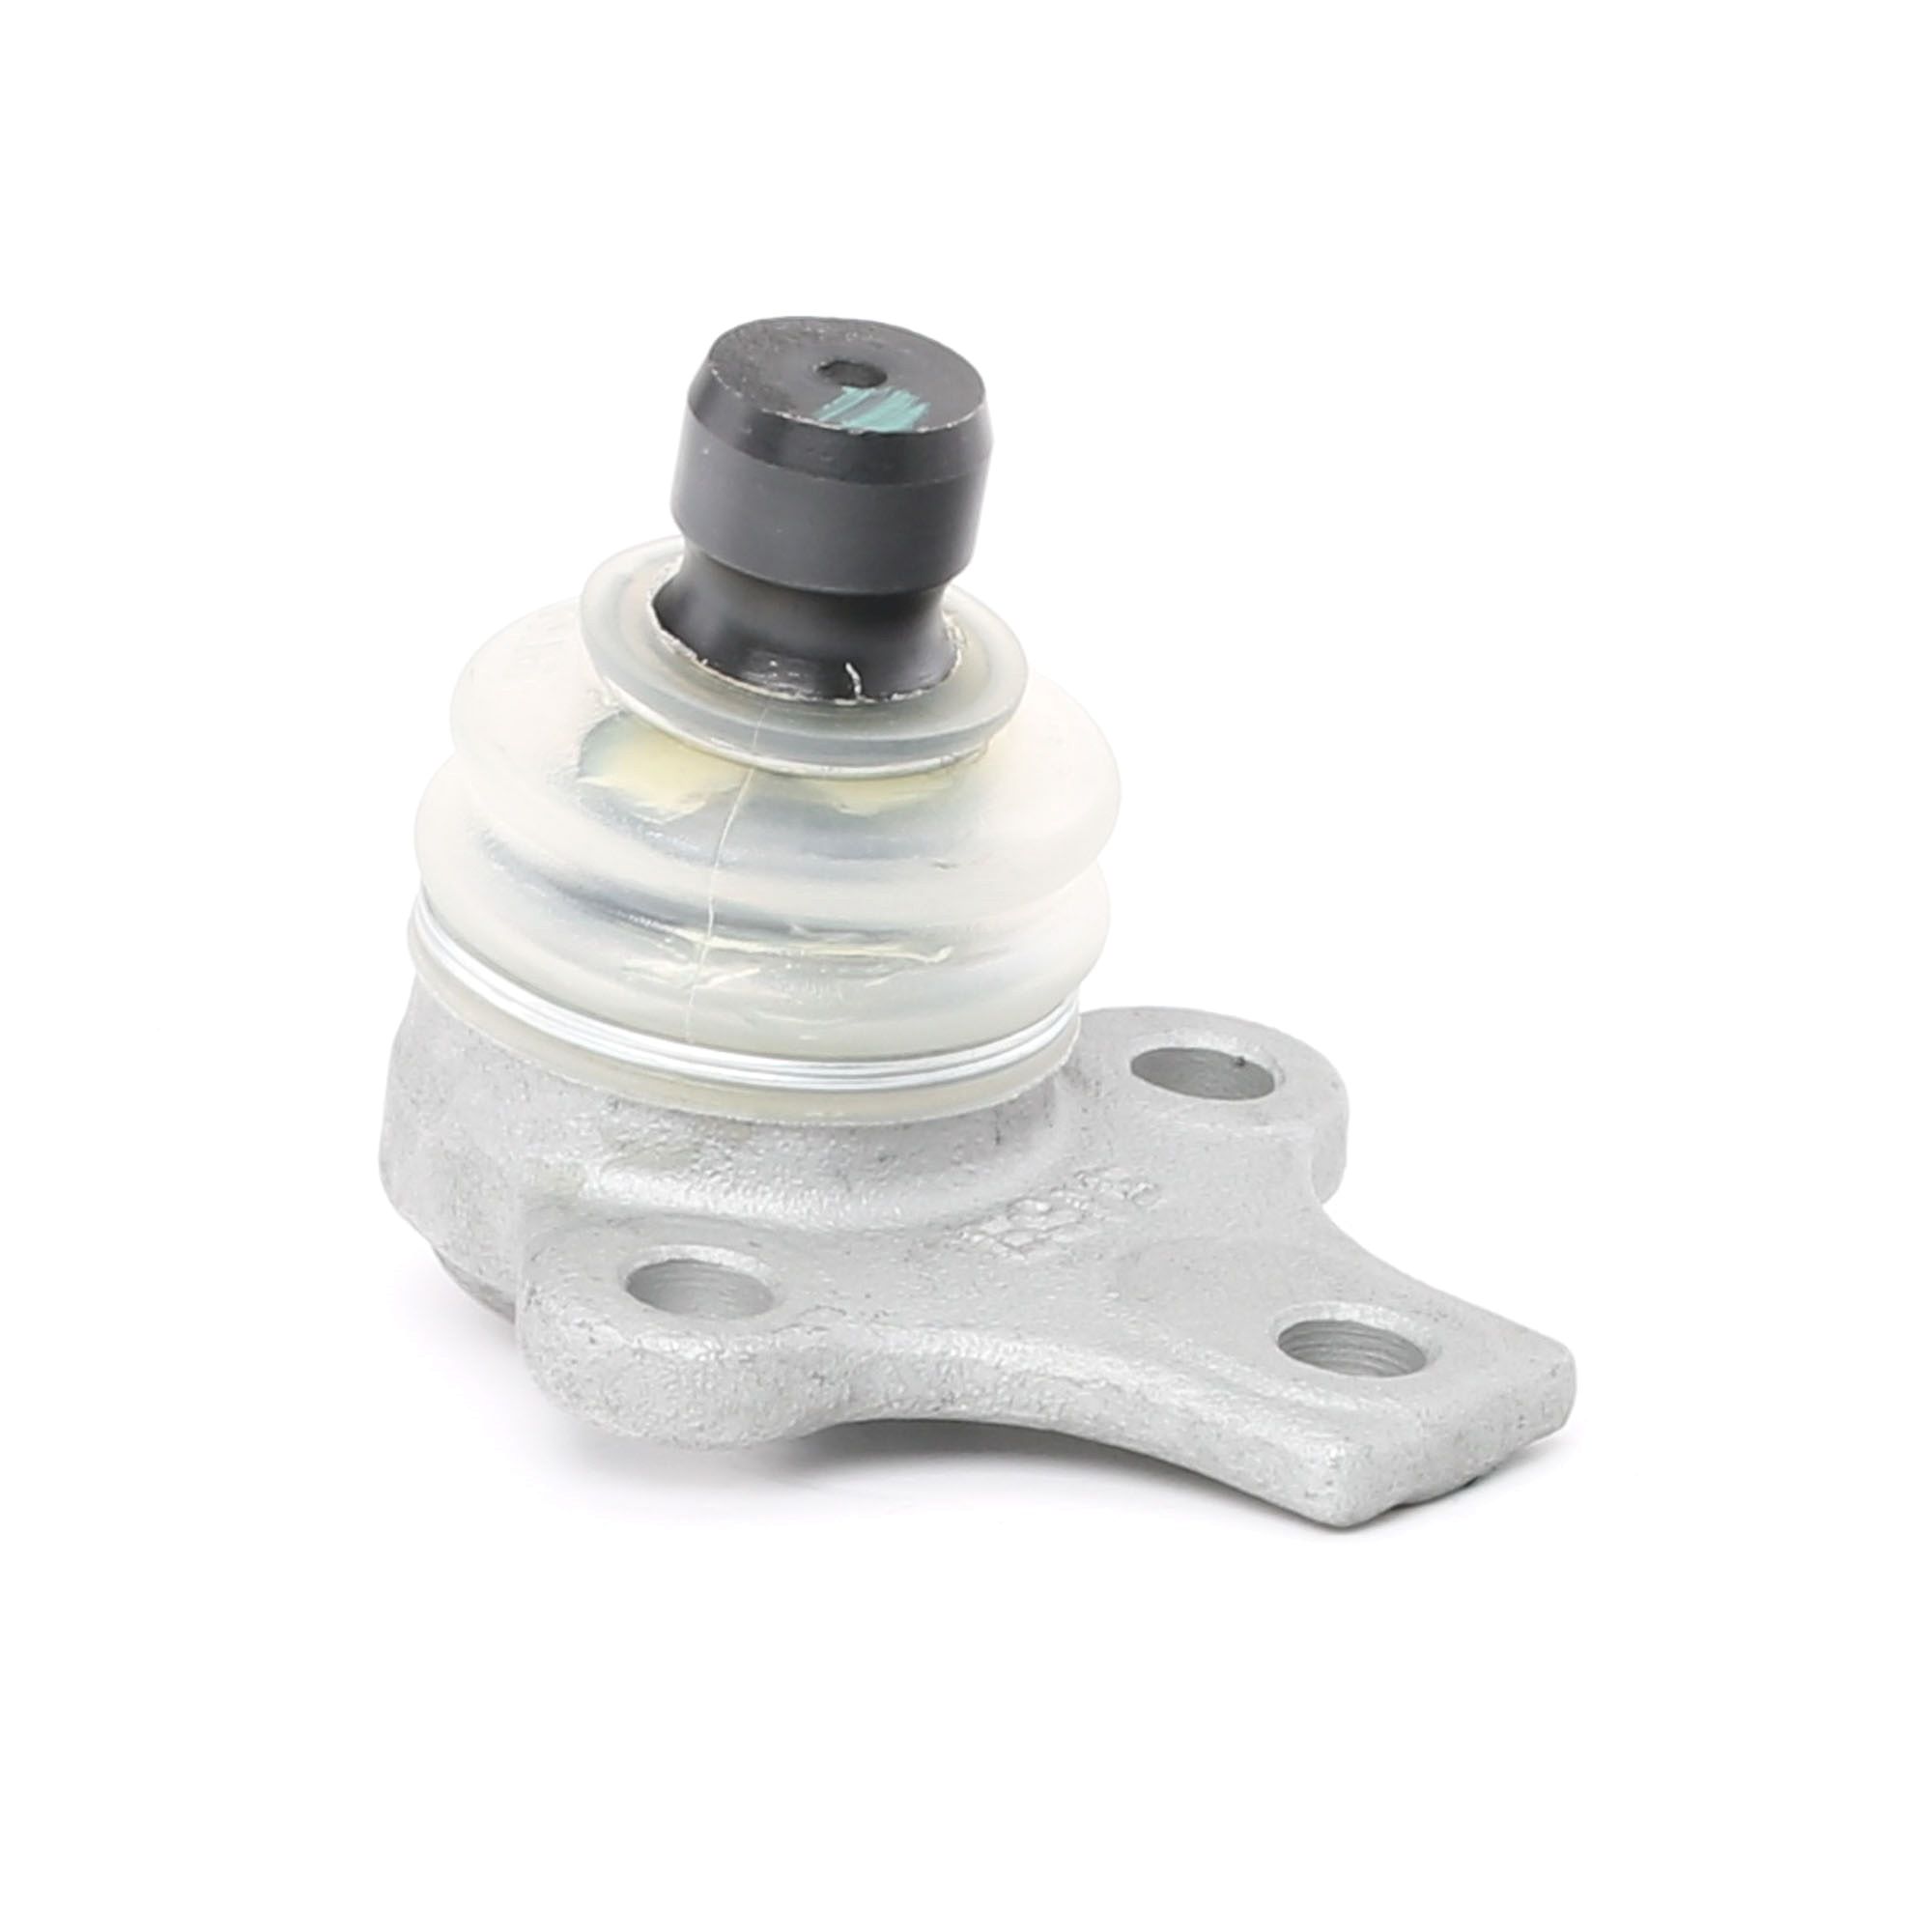 Original FAG Ball joint 825 0352 10 for VW CADDY